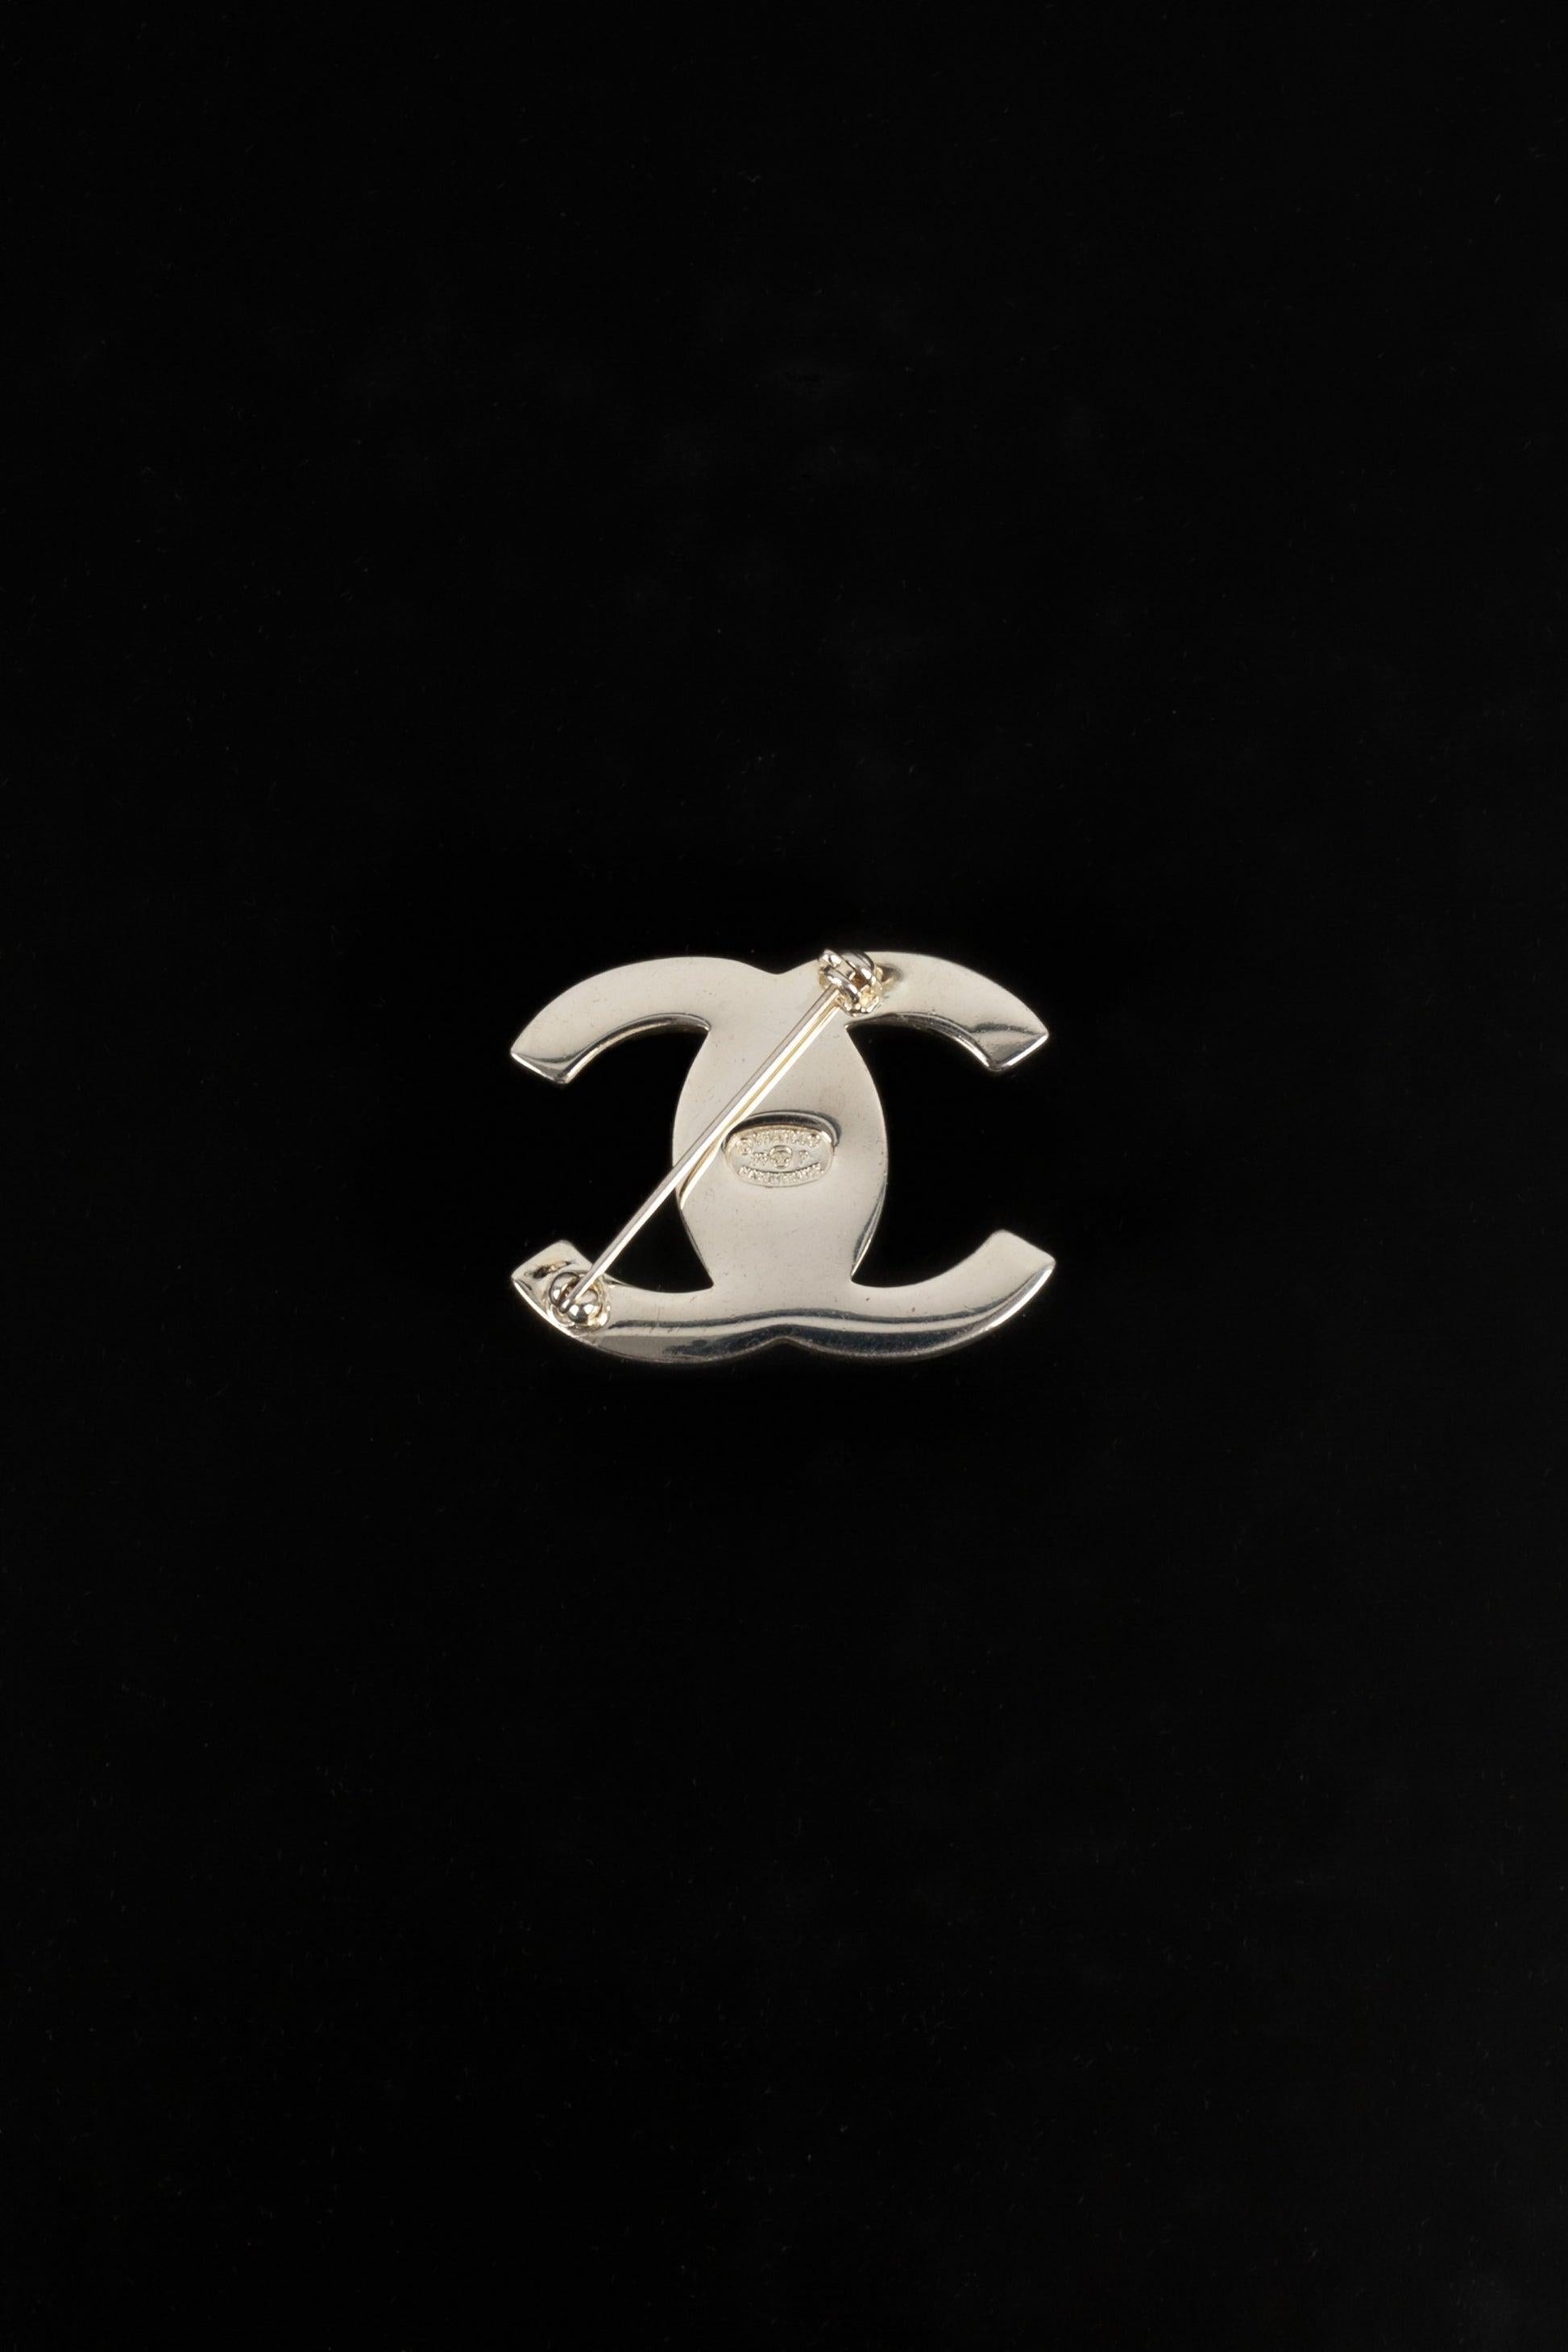 Chanel - (Made in France) Silvery metal turn-lock brooch. 1996 Spring-Summer Collection.

Additional information:
Condition: Very good condition
Dimensions: Height: 2.8 cm
Period: 20th Century

Seller Reference: BRB188
